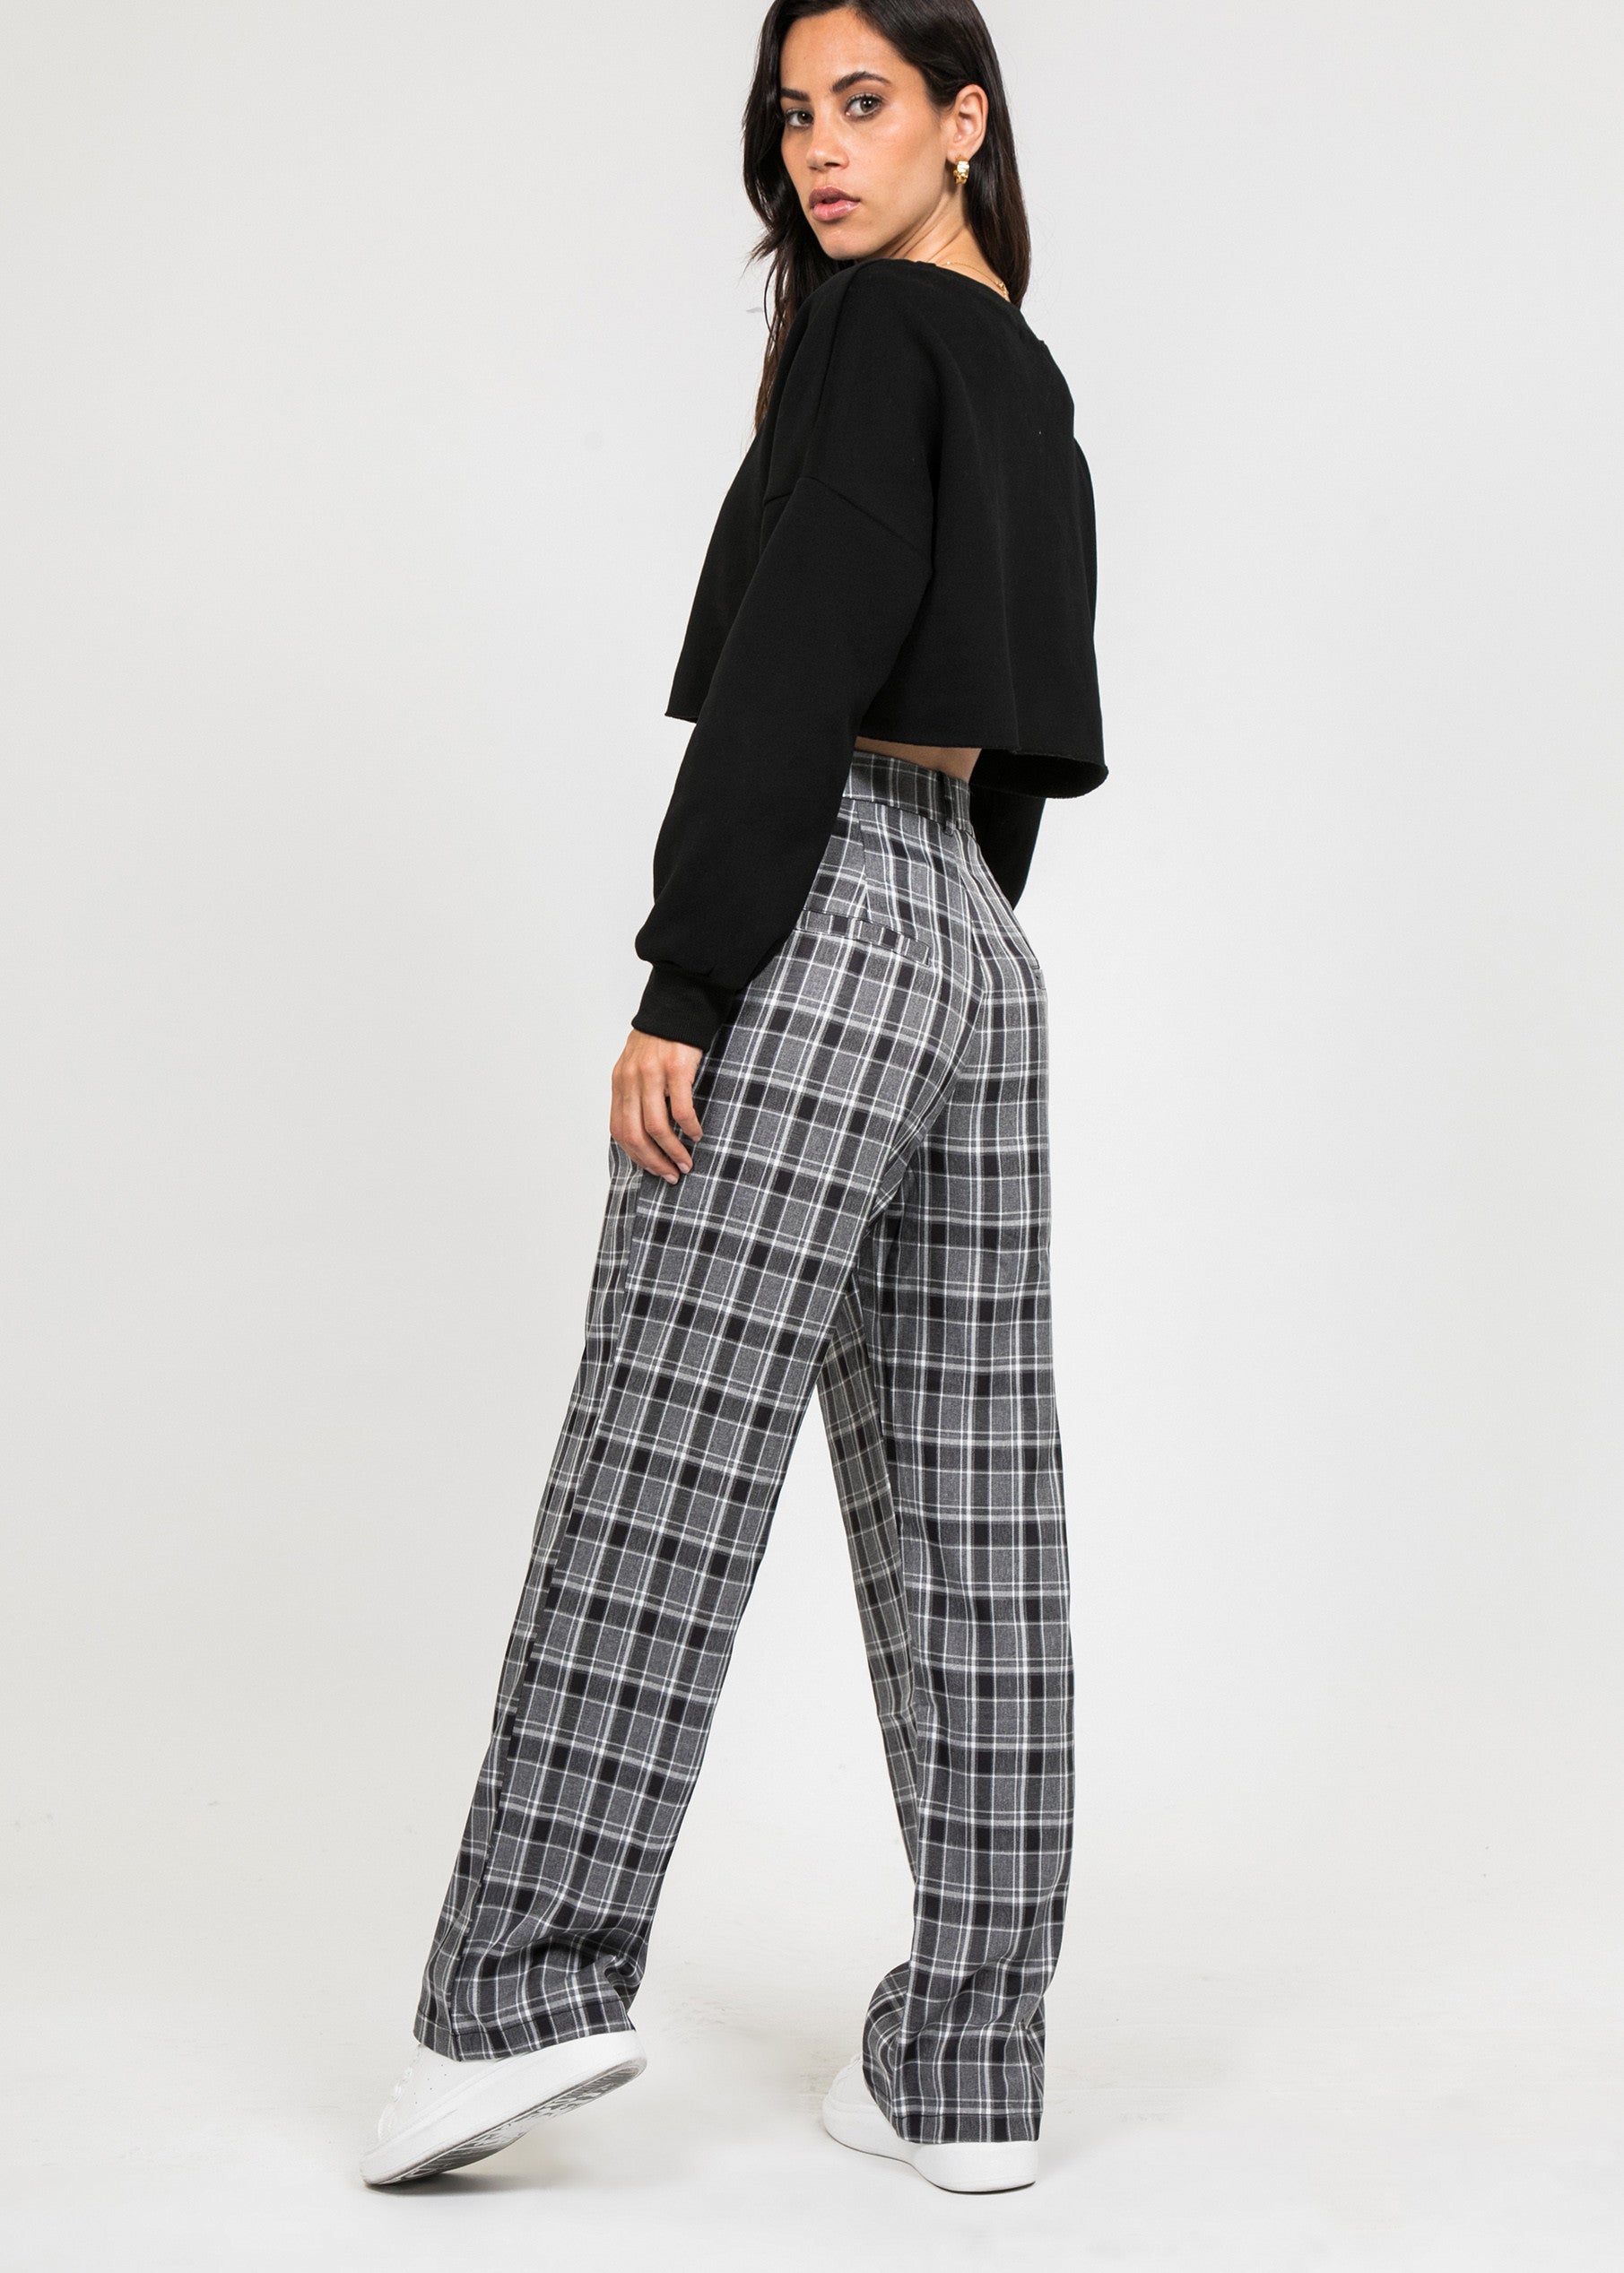 Cotton check trousers | Moschino Official Store